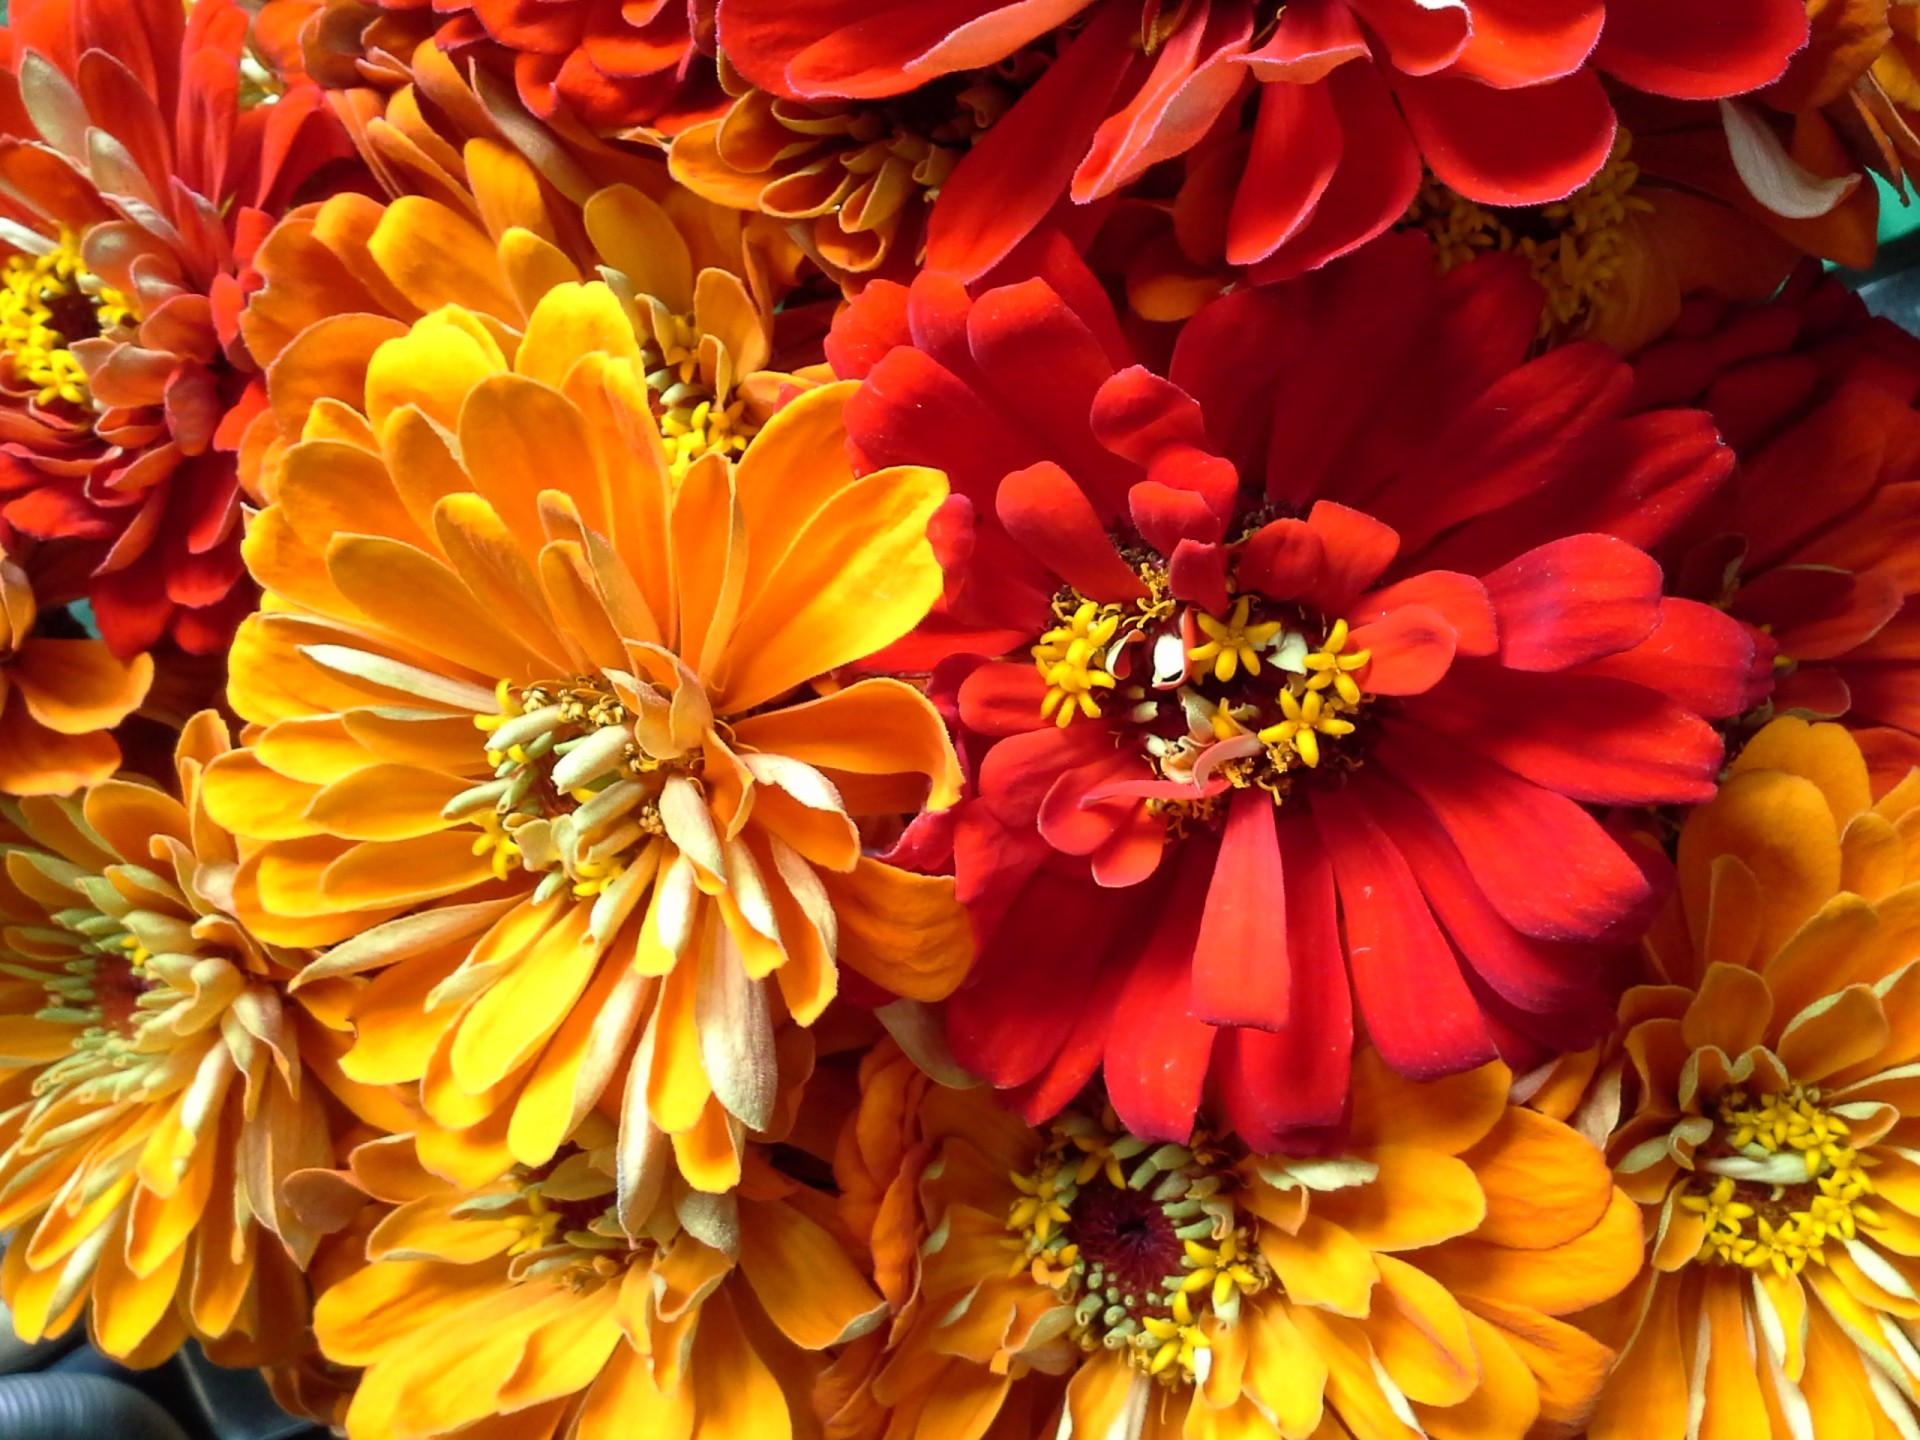 Late summer flowers in two shades of orange